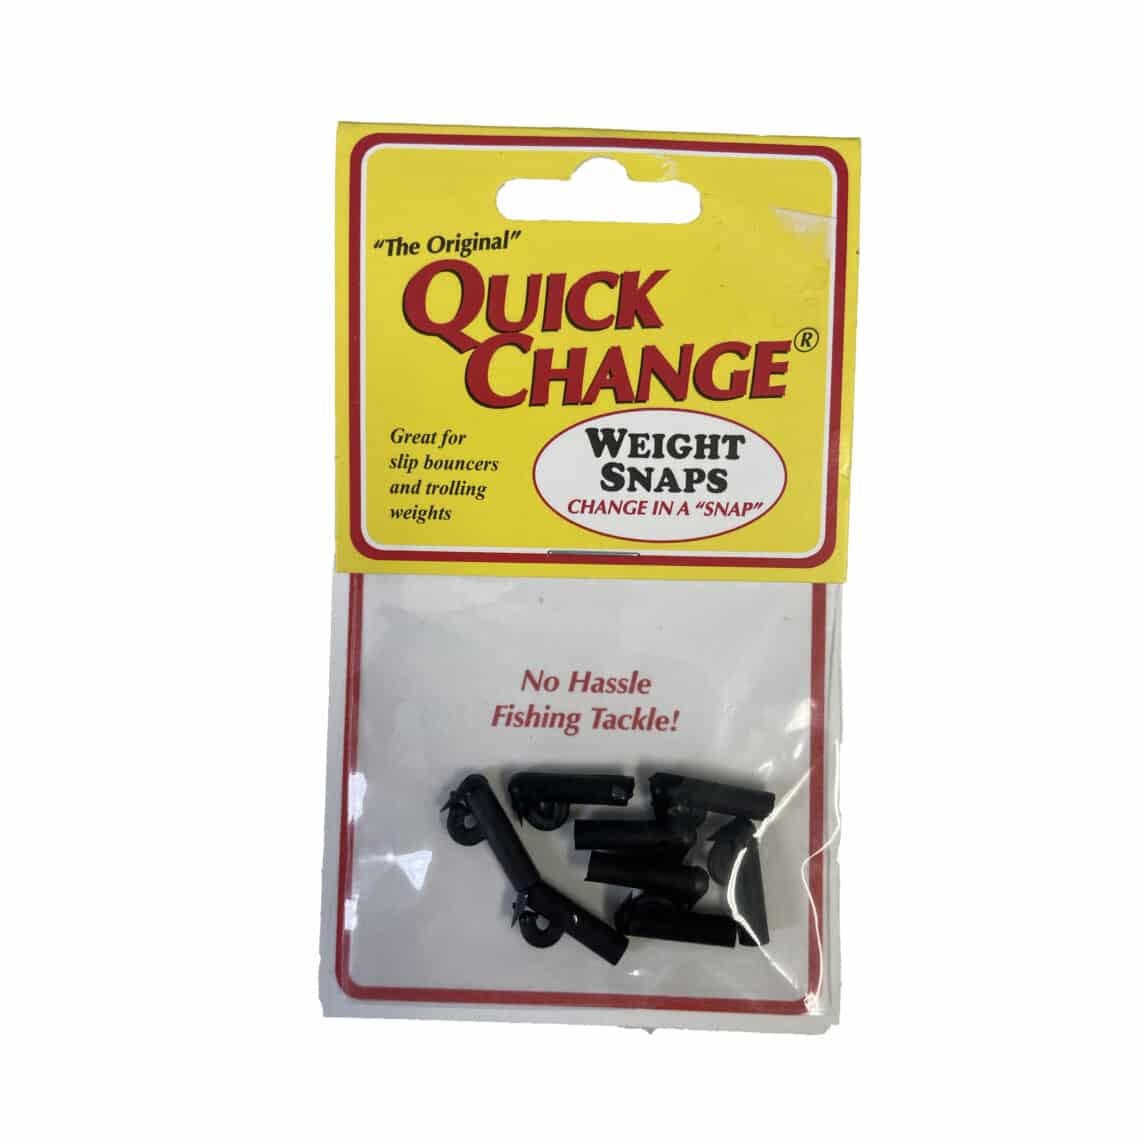 QUICK CHANGE BLACK WEIGHT SNAP - Northwoods Wholesale Outlet